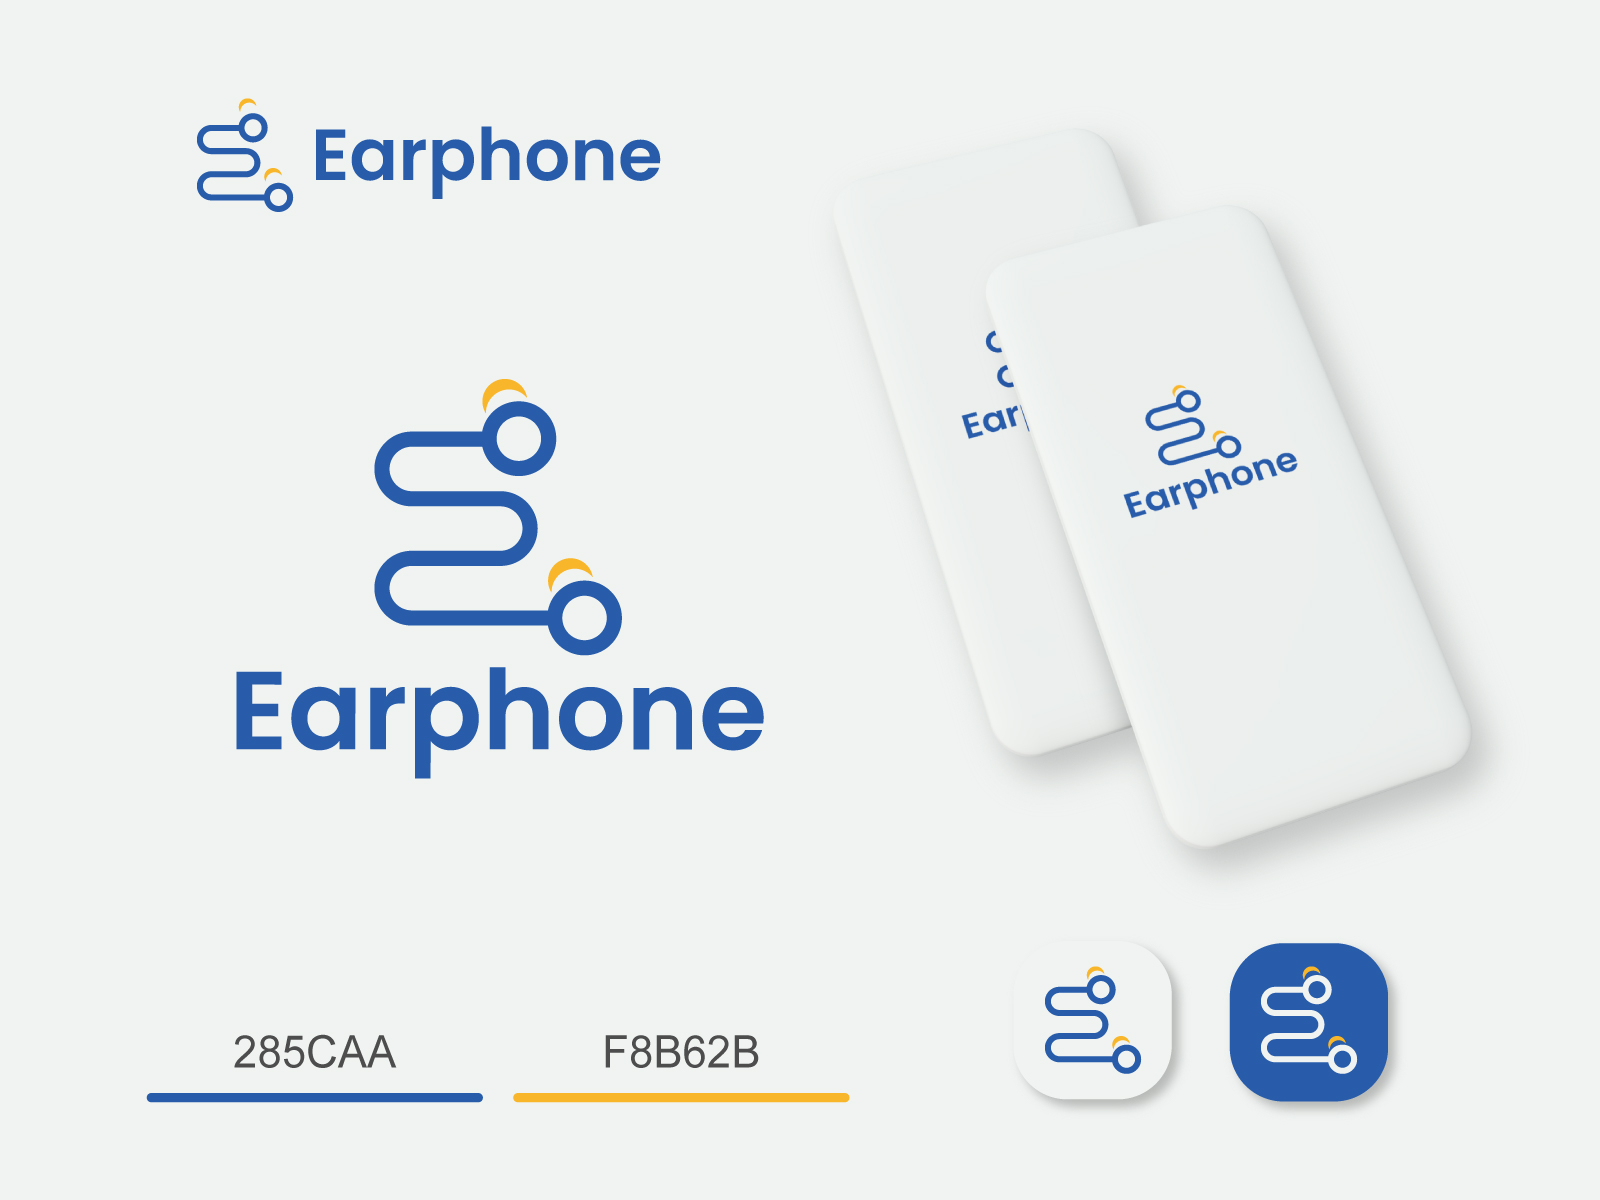 Earphone Icon Stock Photos and Images - 123RF